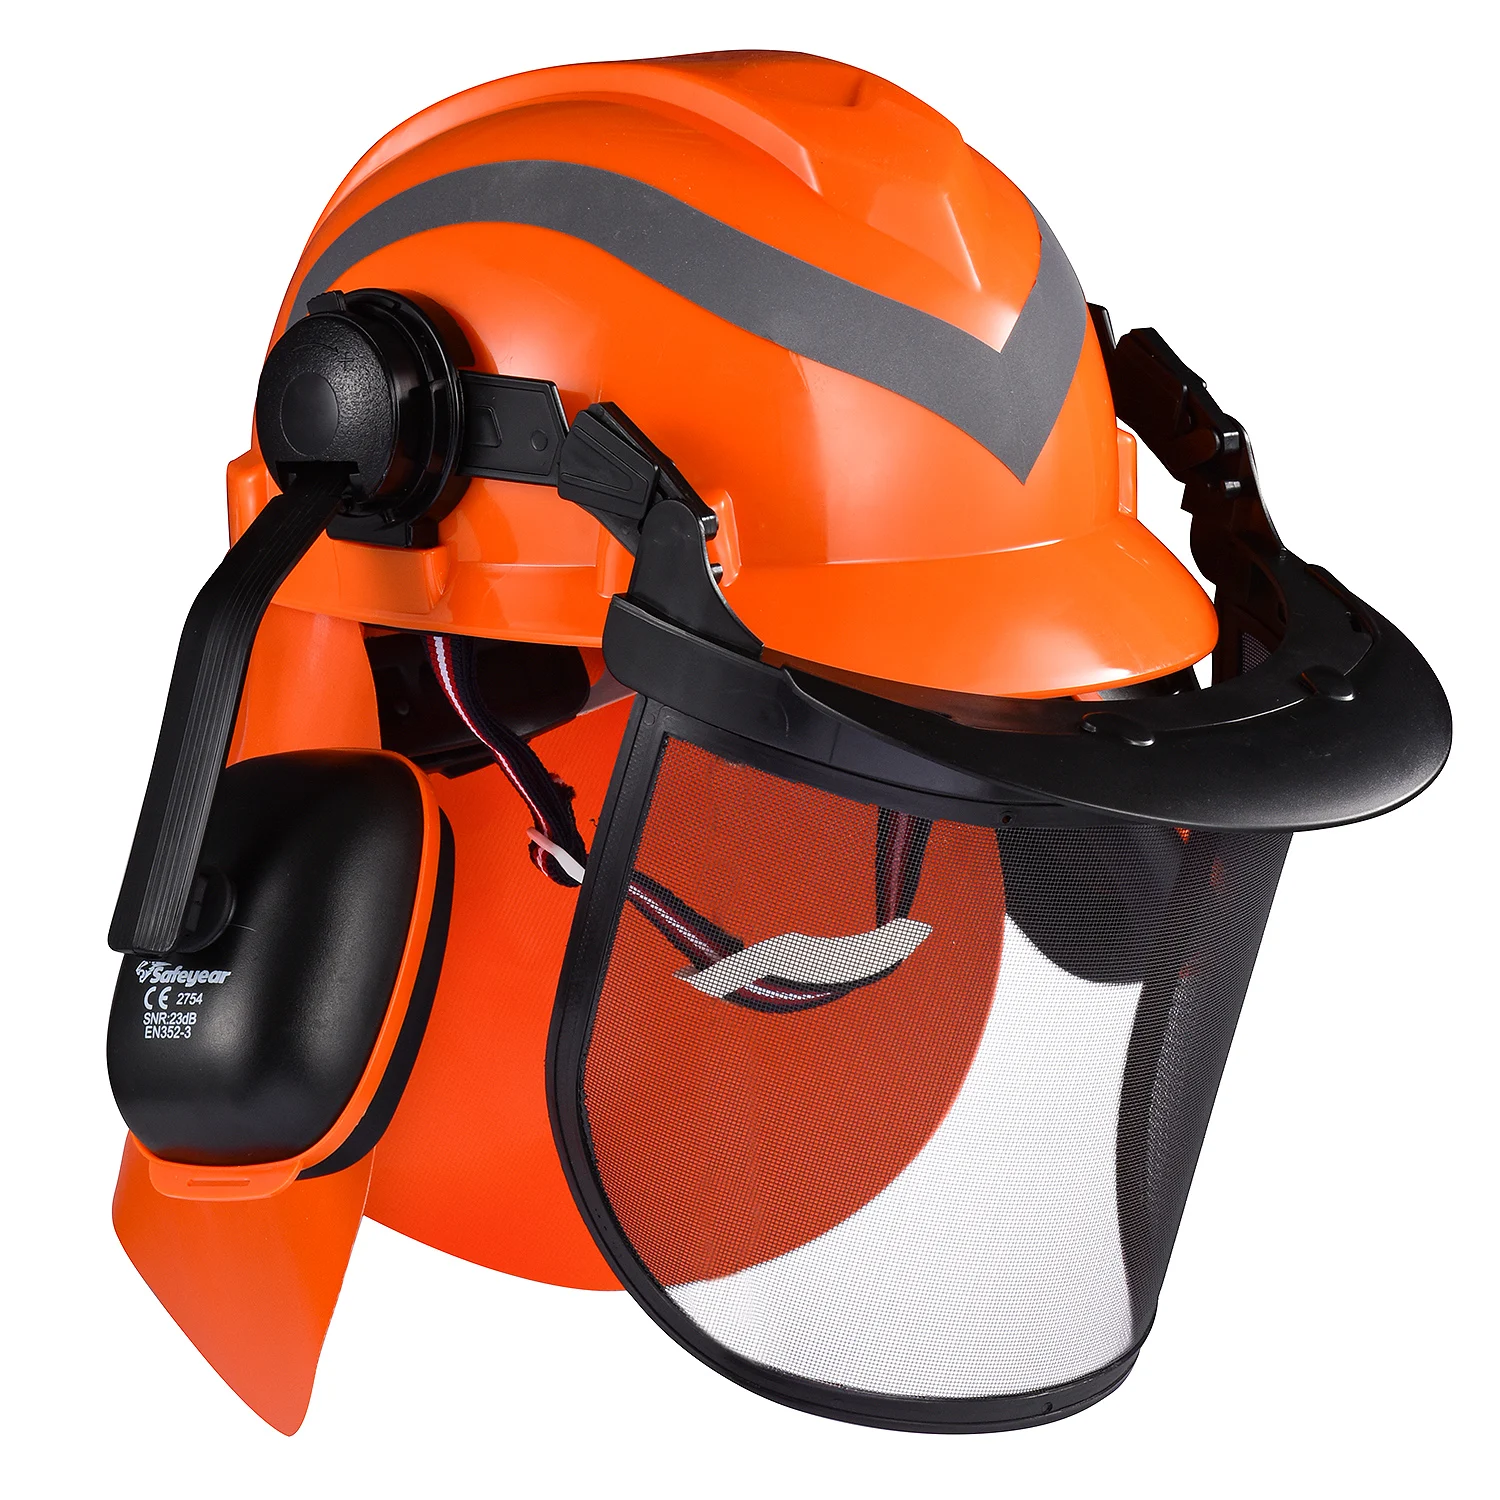 SAFEYEAR Pro Forestry Chainsaw Safety Helmet With Adjustable 27SNR Ear Muffs,Mesh Visor.EN397 Approved Quality Hard Hat